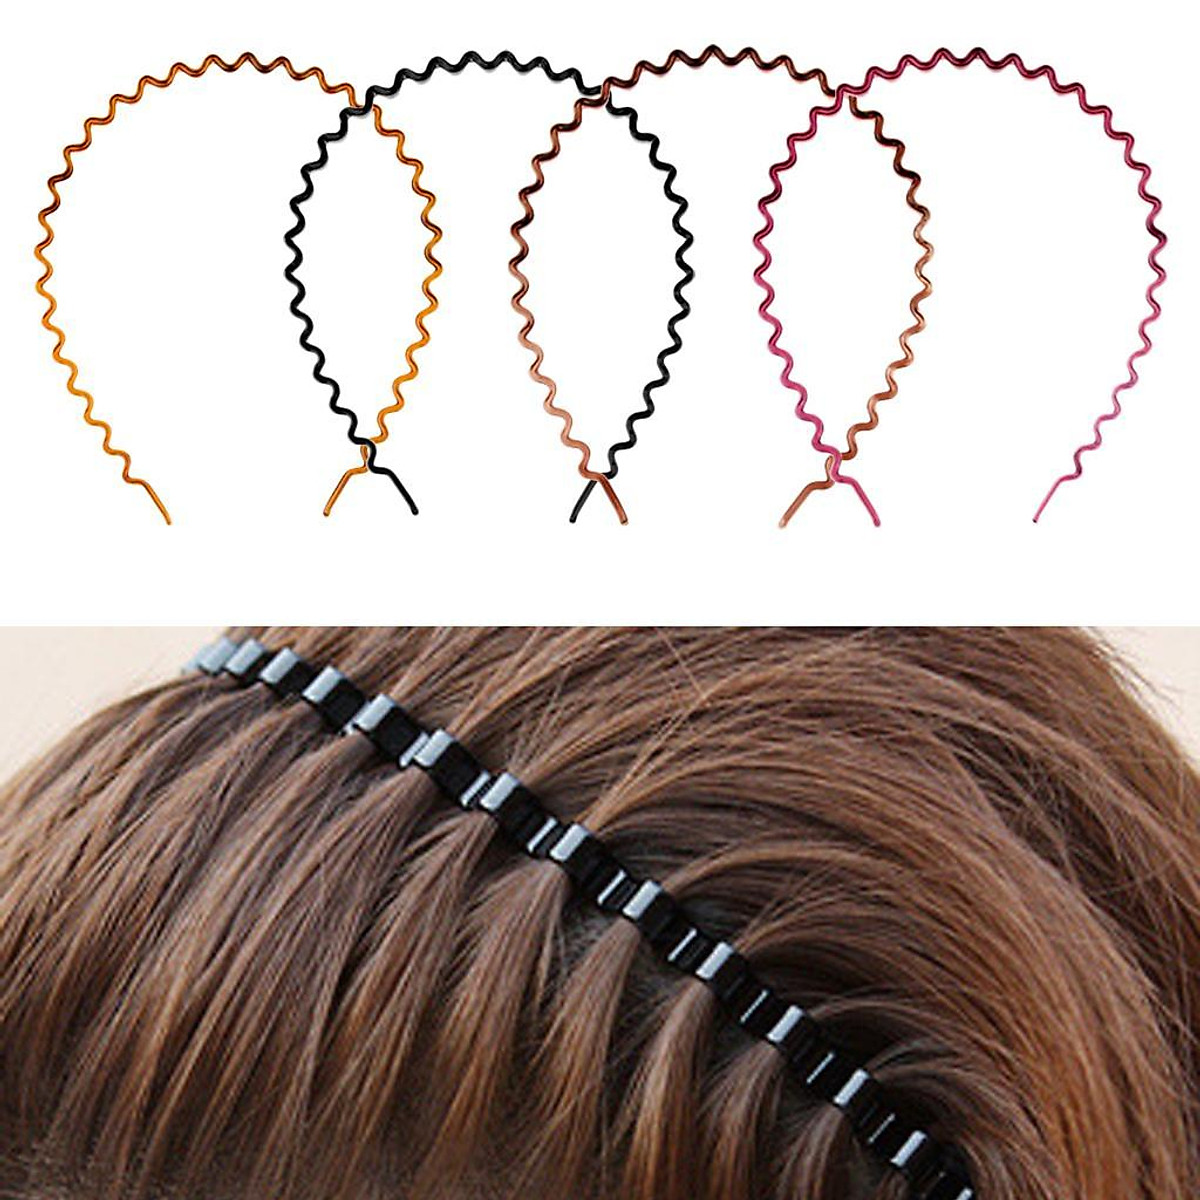 2-5pack Zig Zag Hair Band Toothed Wave Headband Women Men Girls Hair  Accessory